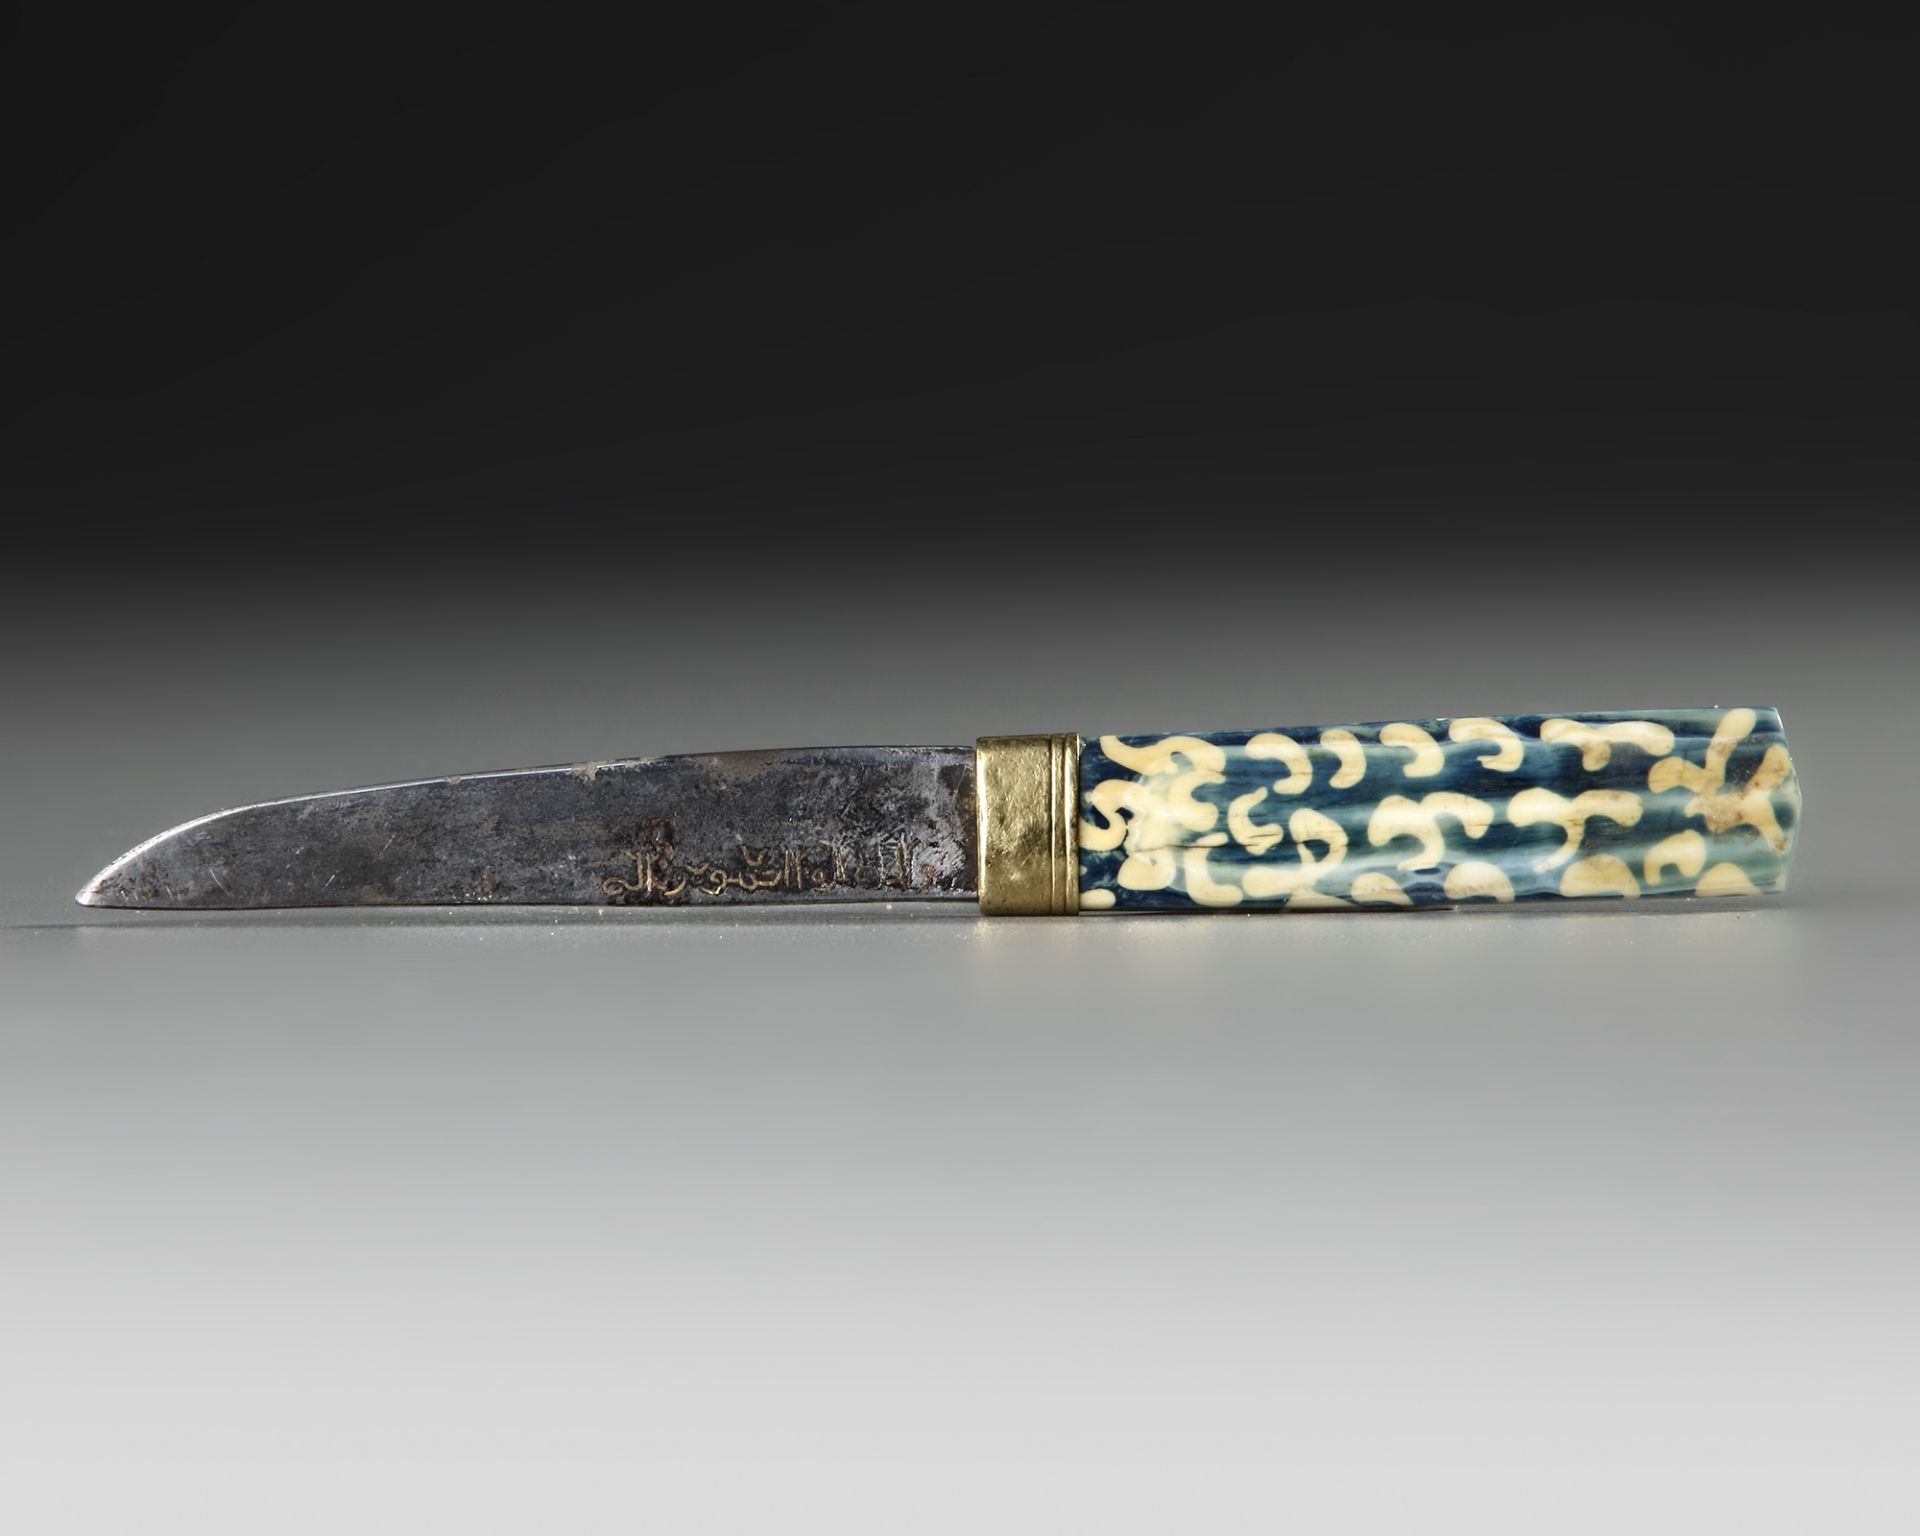 A SMALL INSCRIBED KNIFE, LATE TIMURID, 15TH-16TH CENTURY - Bild 2 aus 4